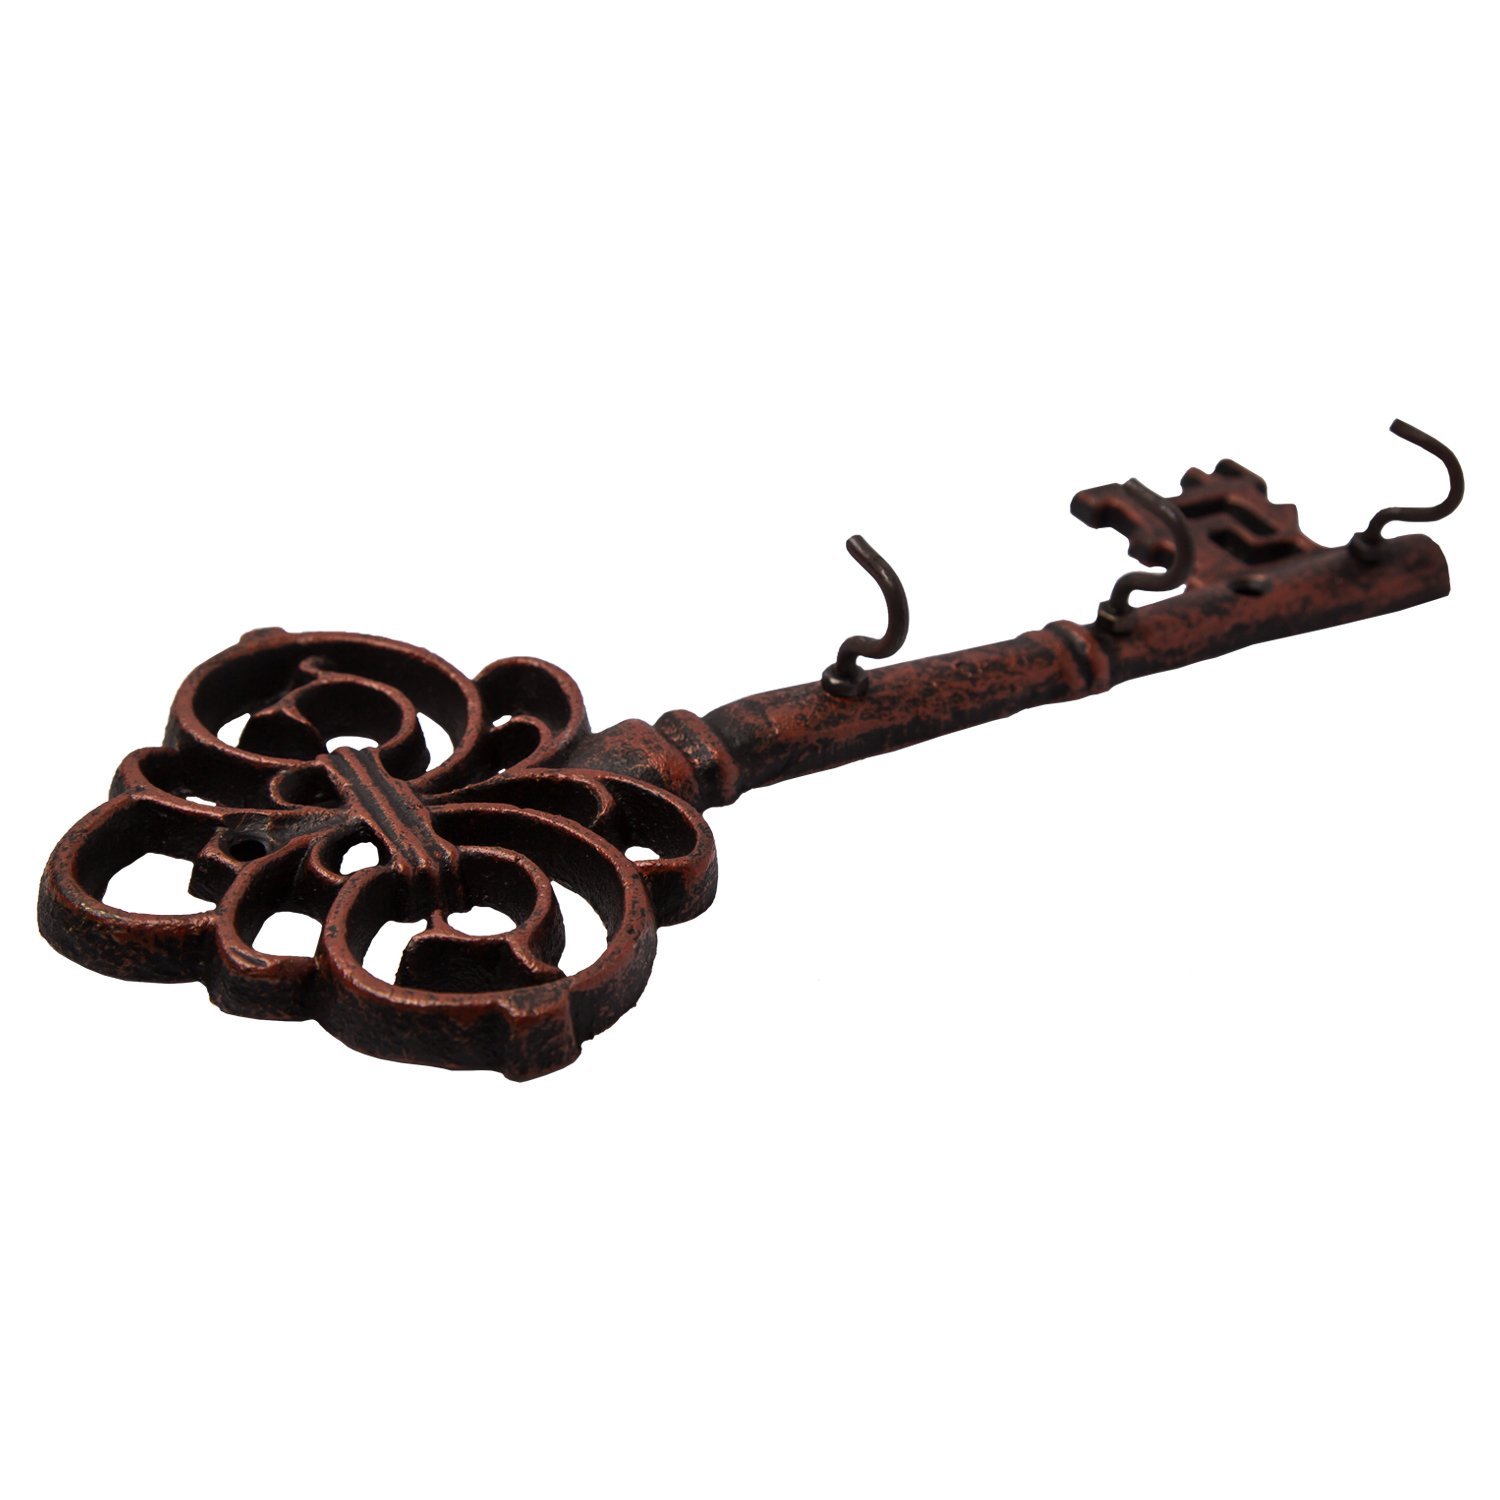  Decorative  Wall  Mounted Cast Iron Key  Holder  Best Offer 